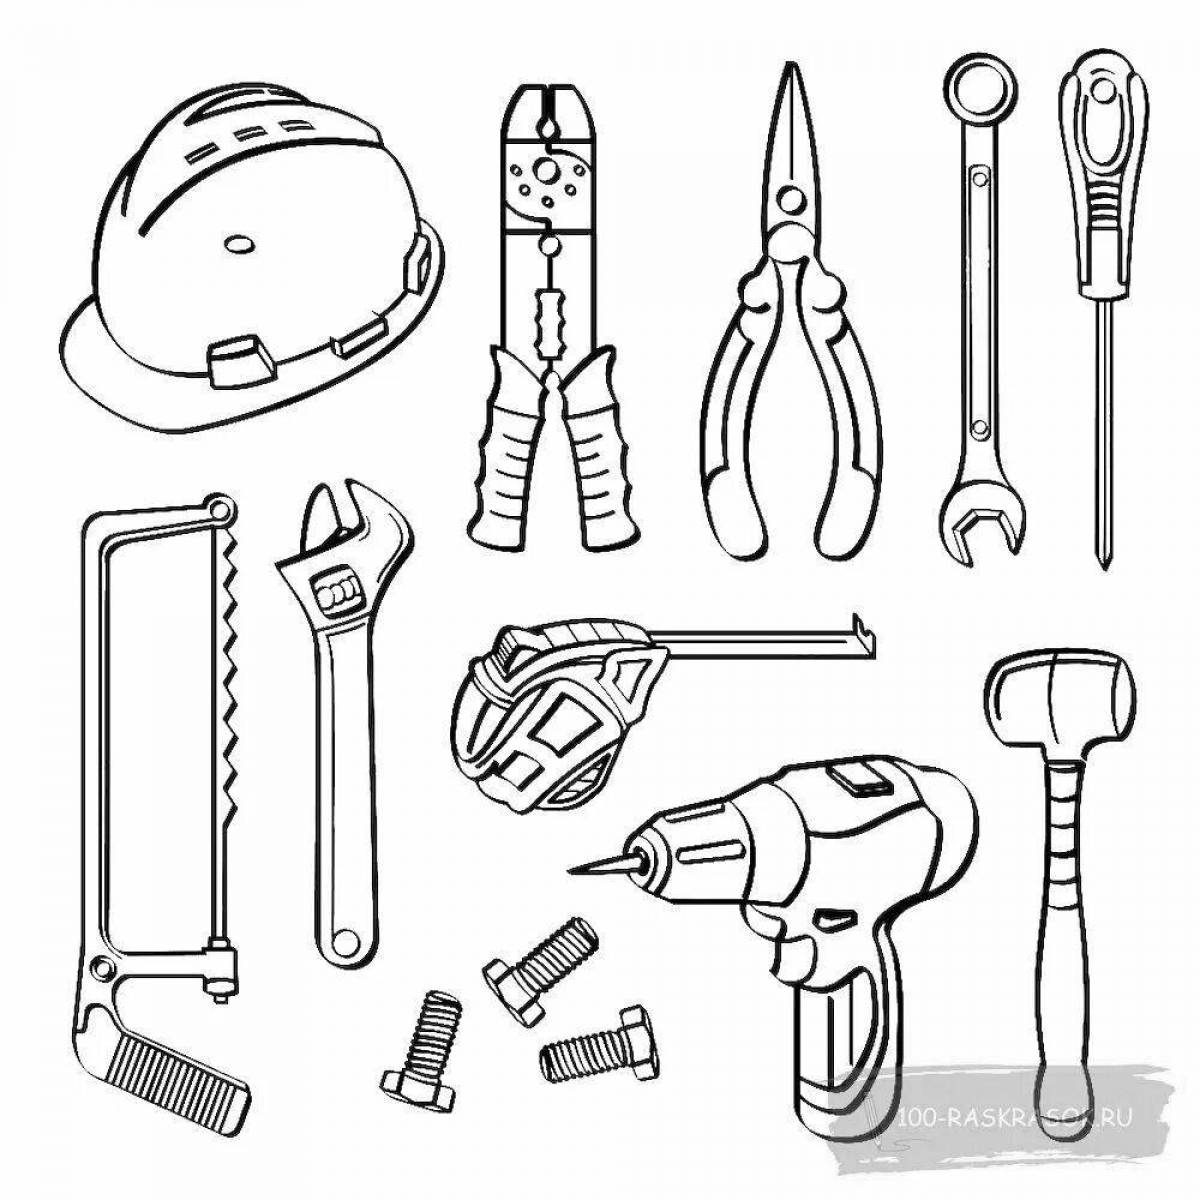 Tools for kids #13